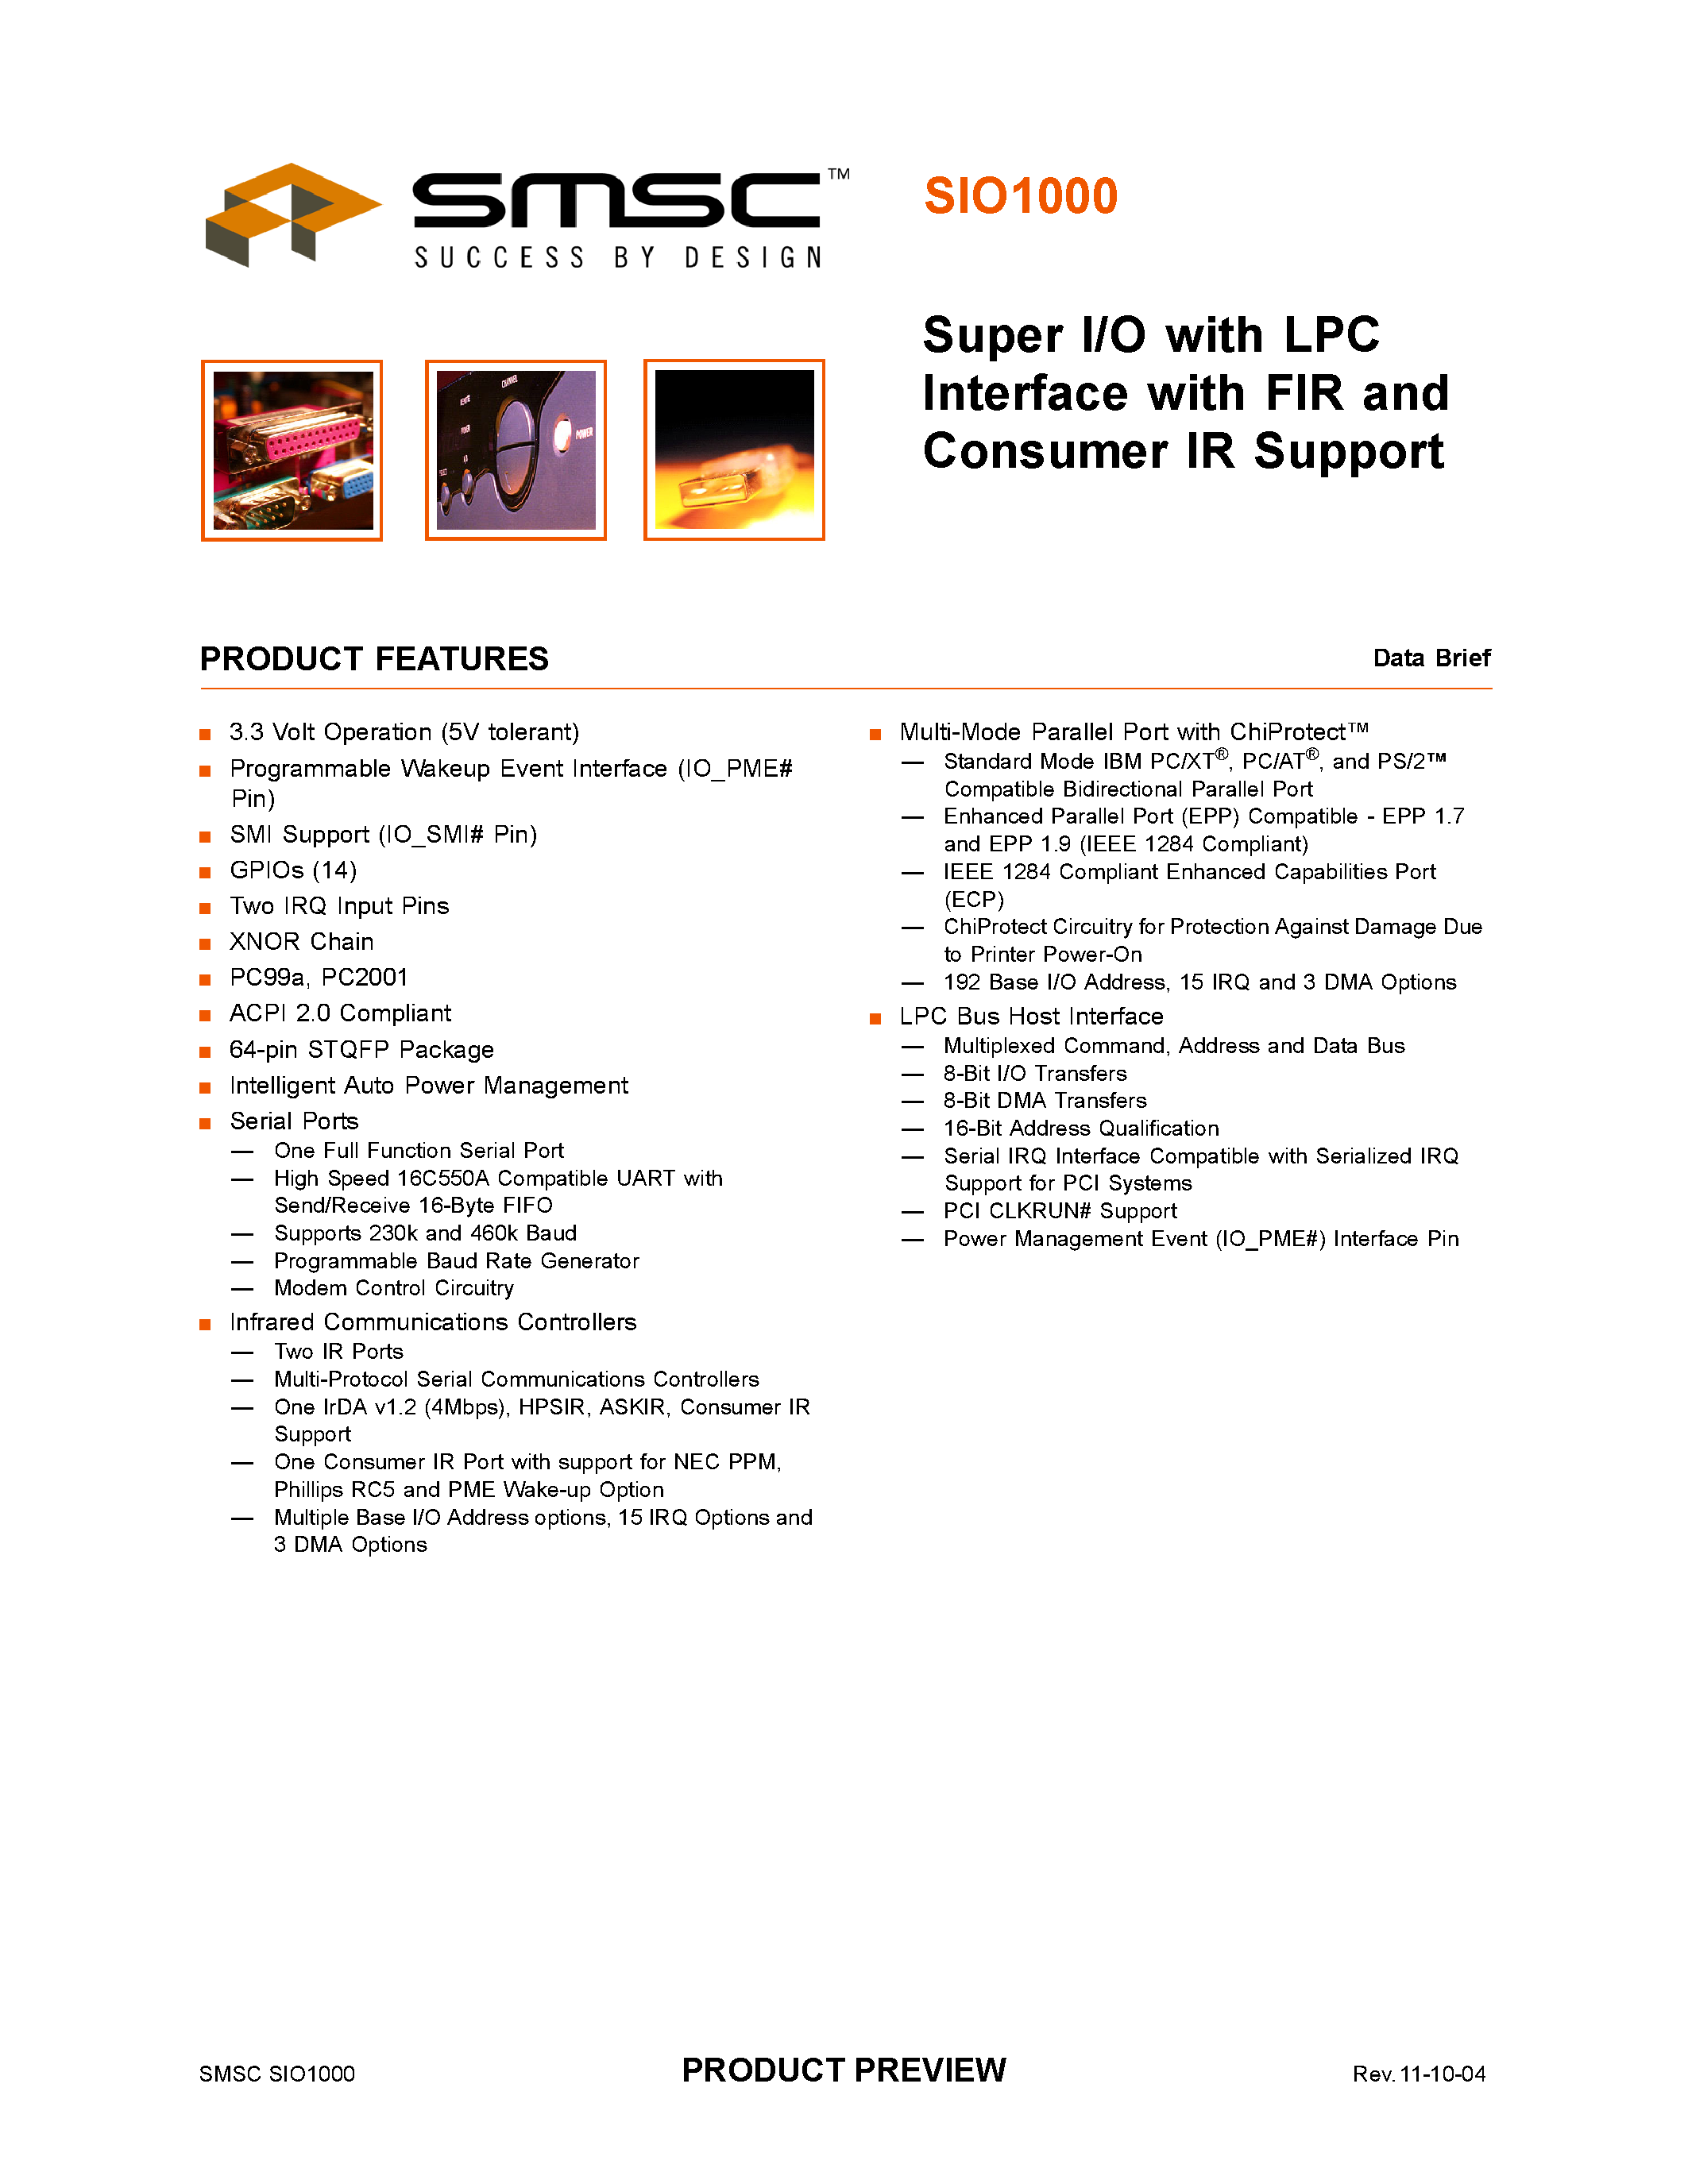 Datasheet SIO1000 - SUPER I/O WITH LPC INTERFACE WITH FIR AND CONSUMER IR SUPPORT page 1